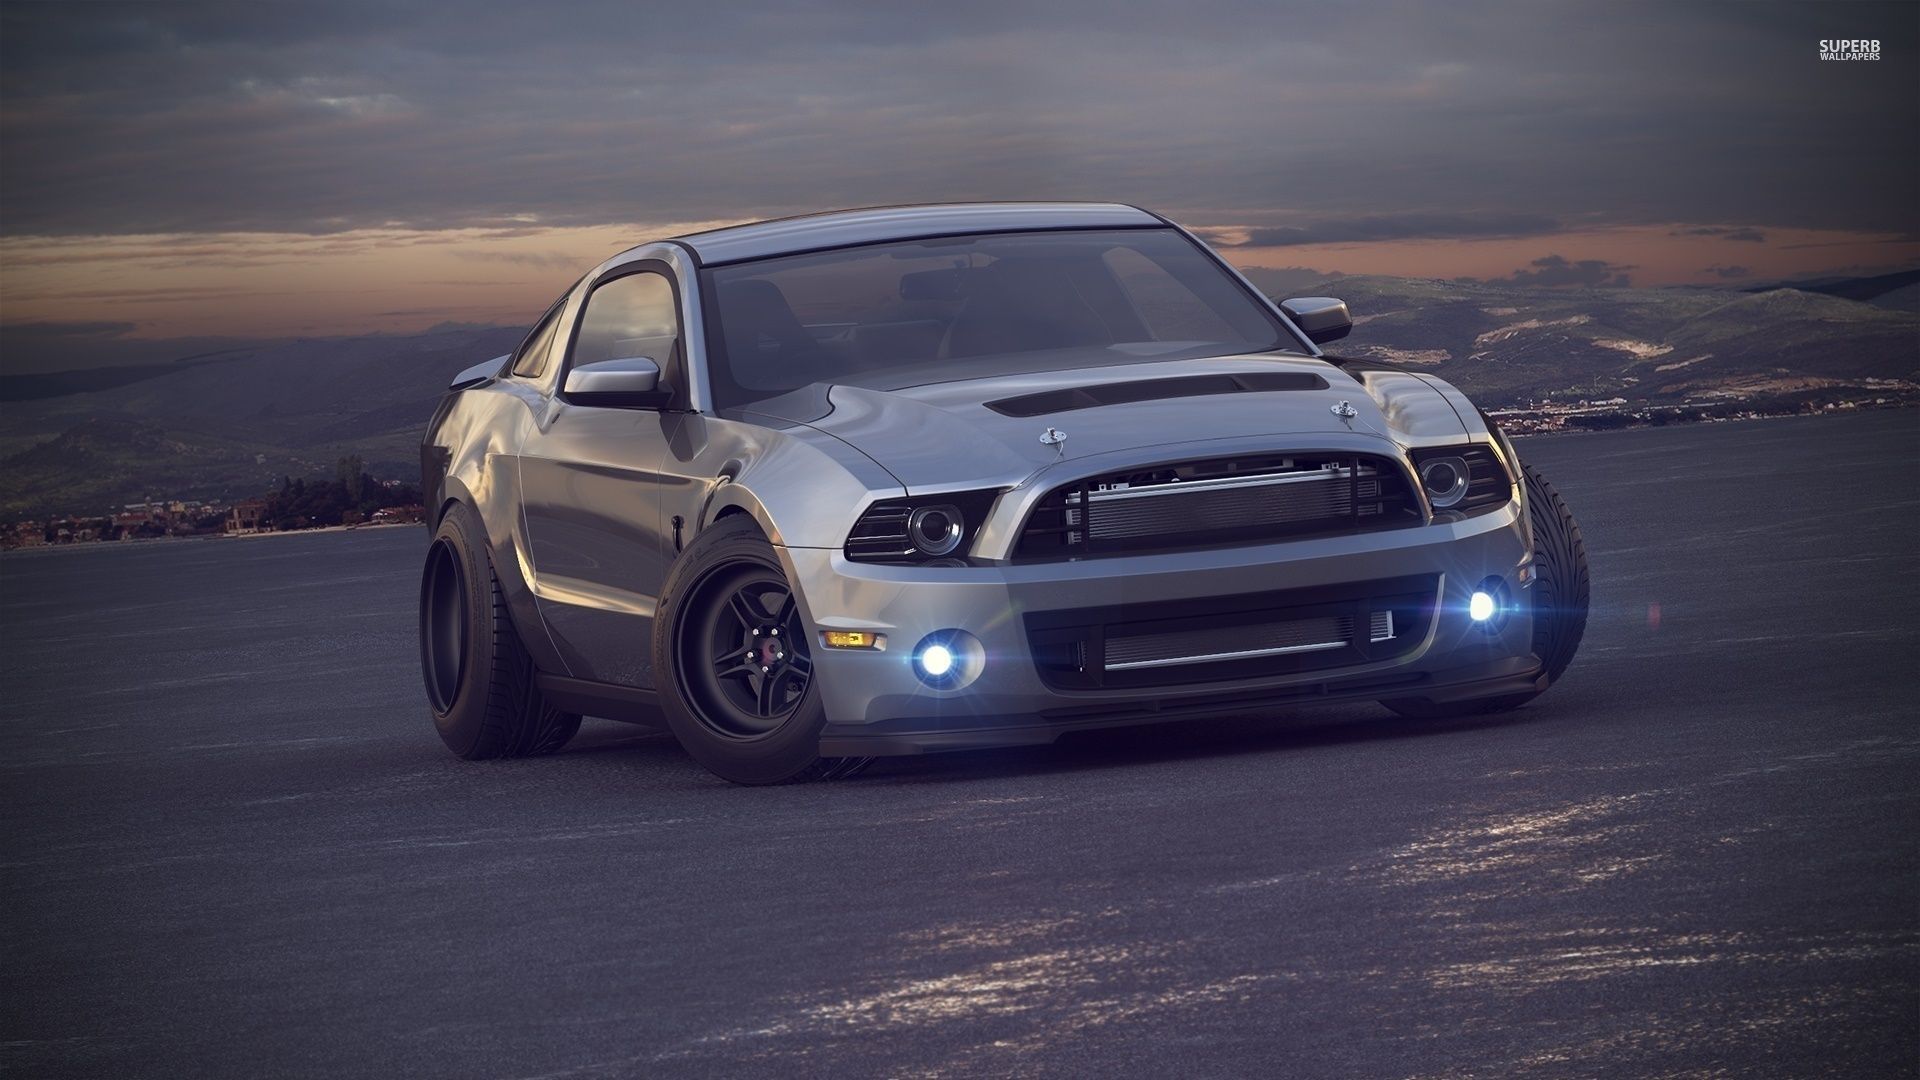 Ford Mustang Shelby wallpaper - Car wallpapers - #45134